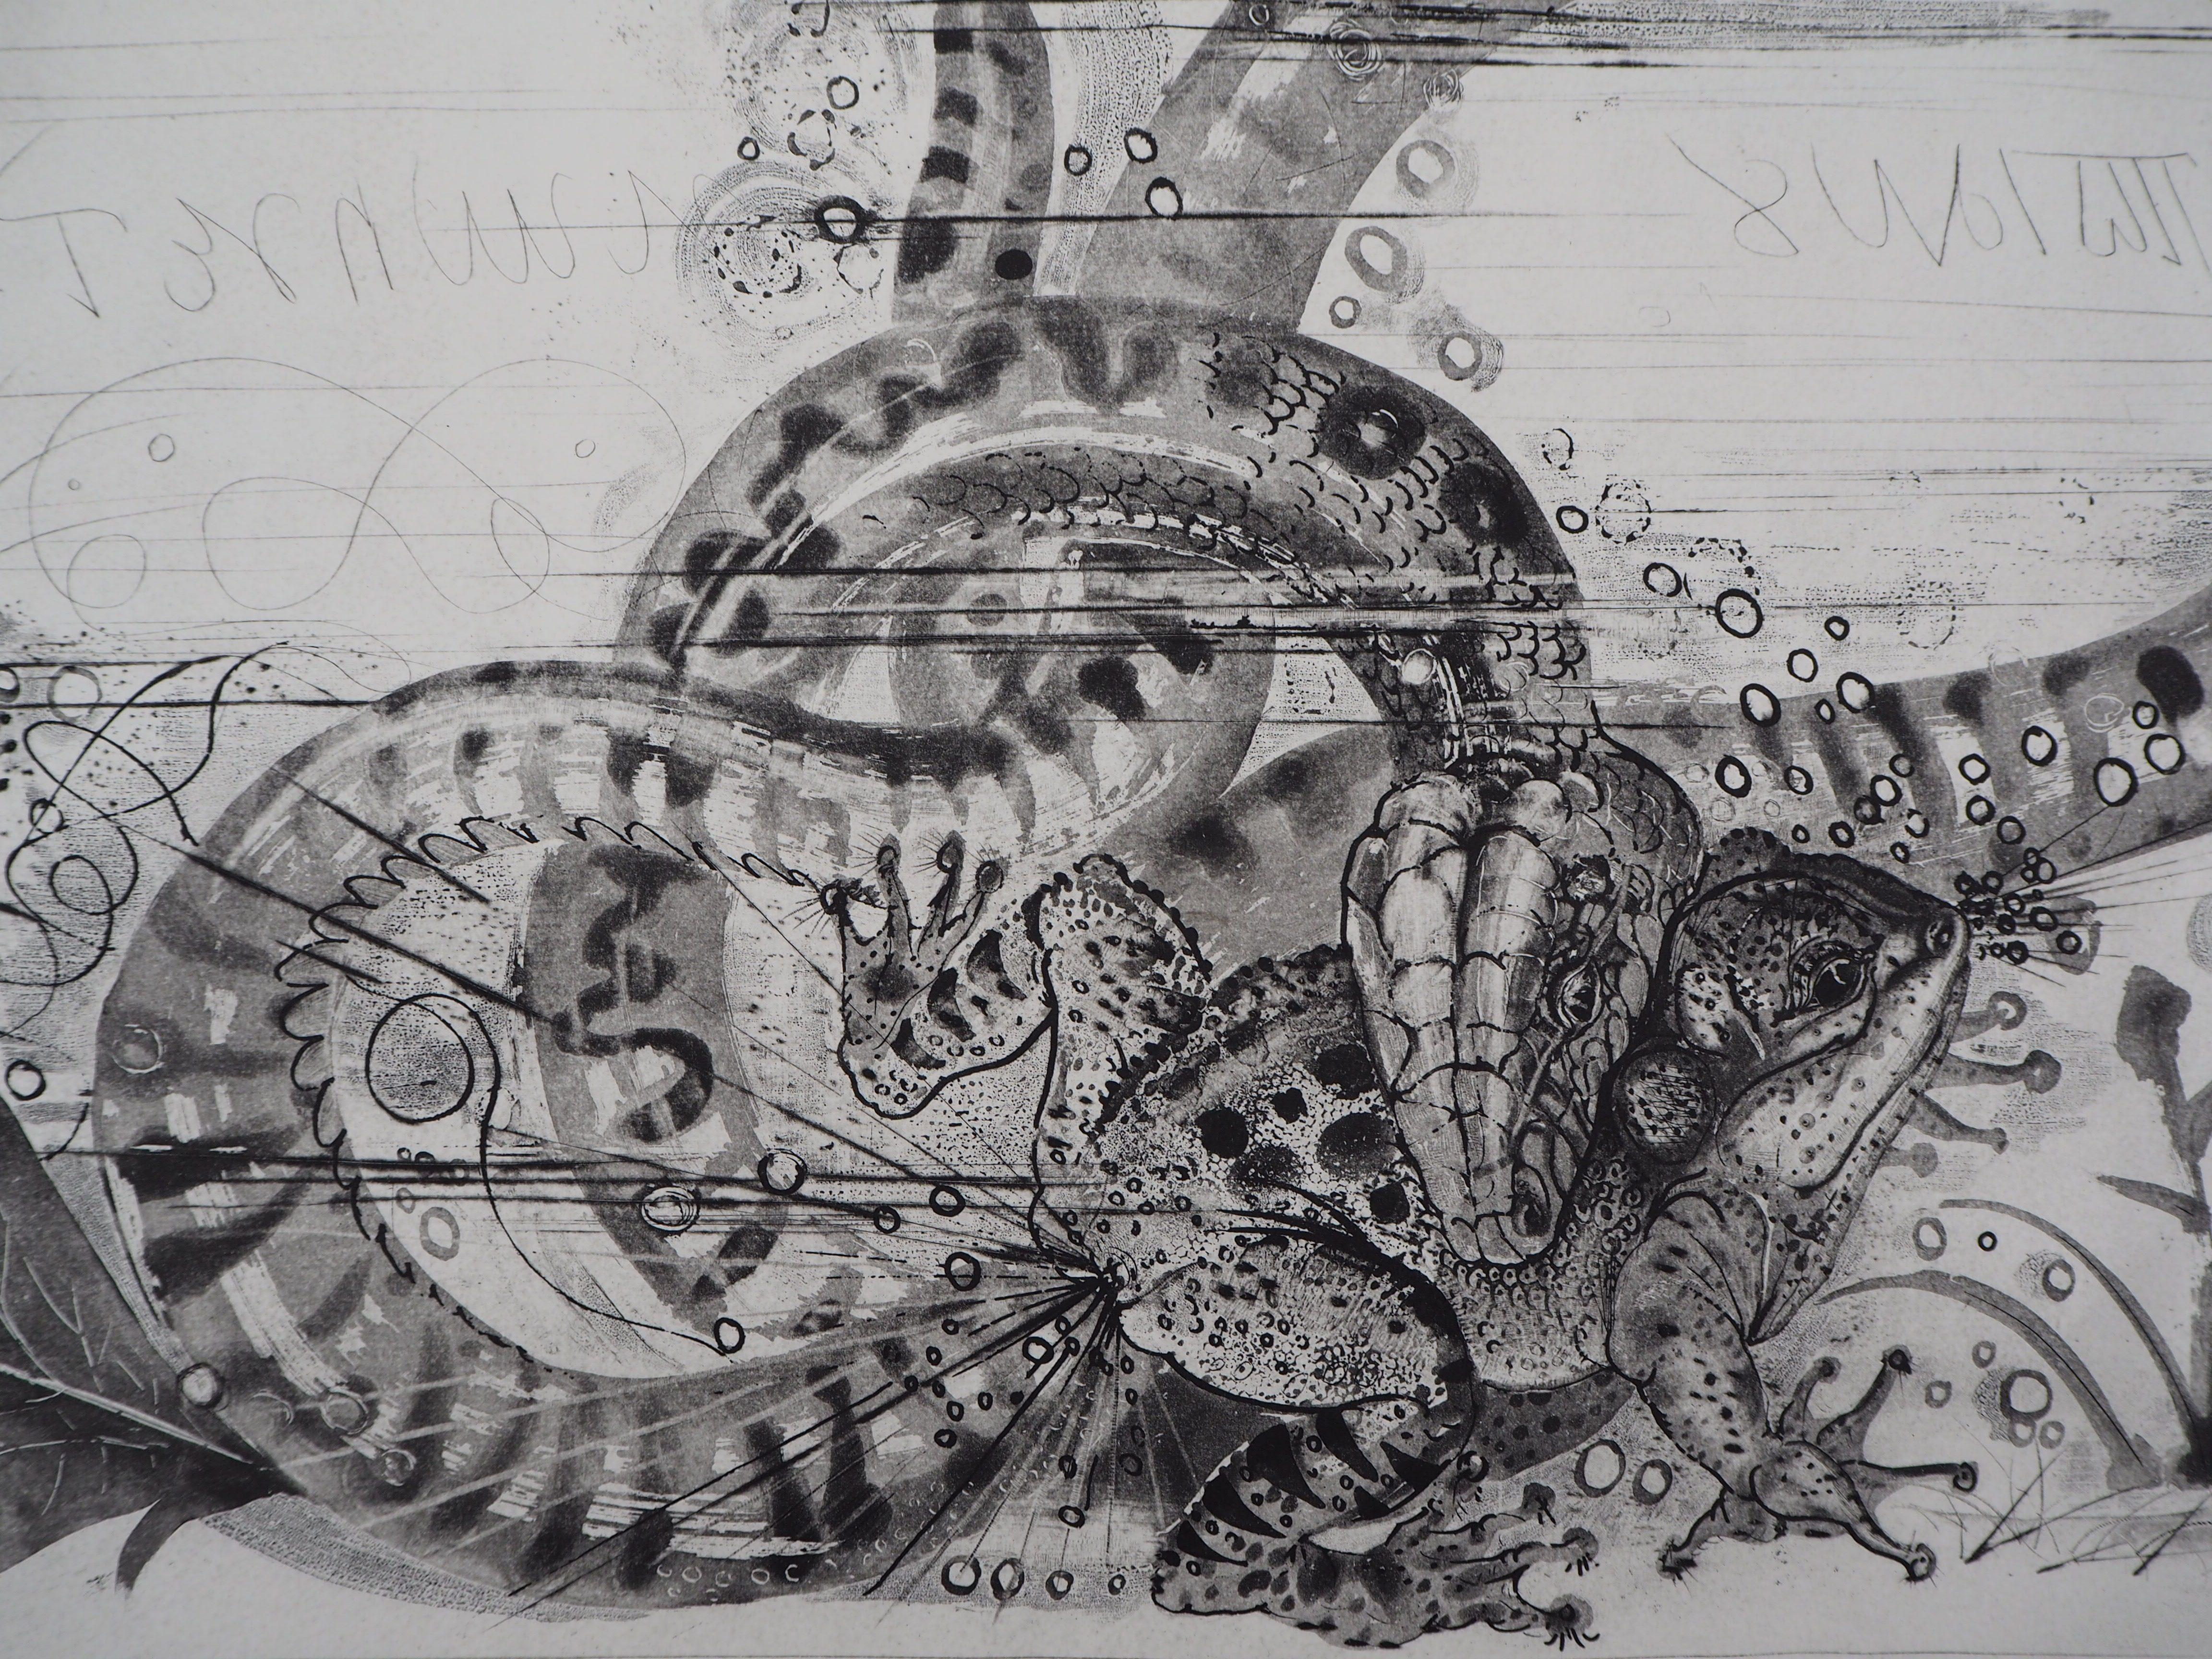 Oppian : Snake and Toad - Original Etching